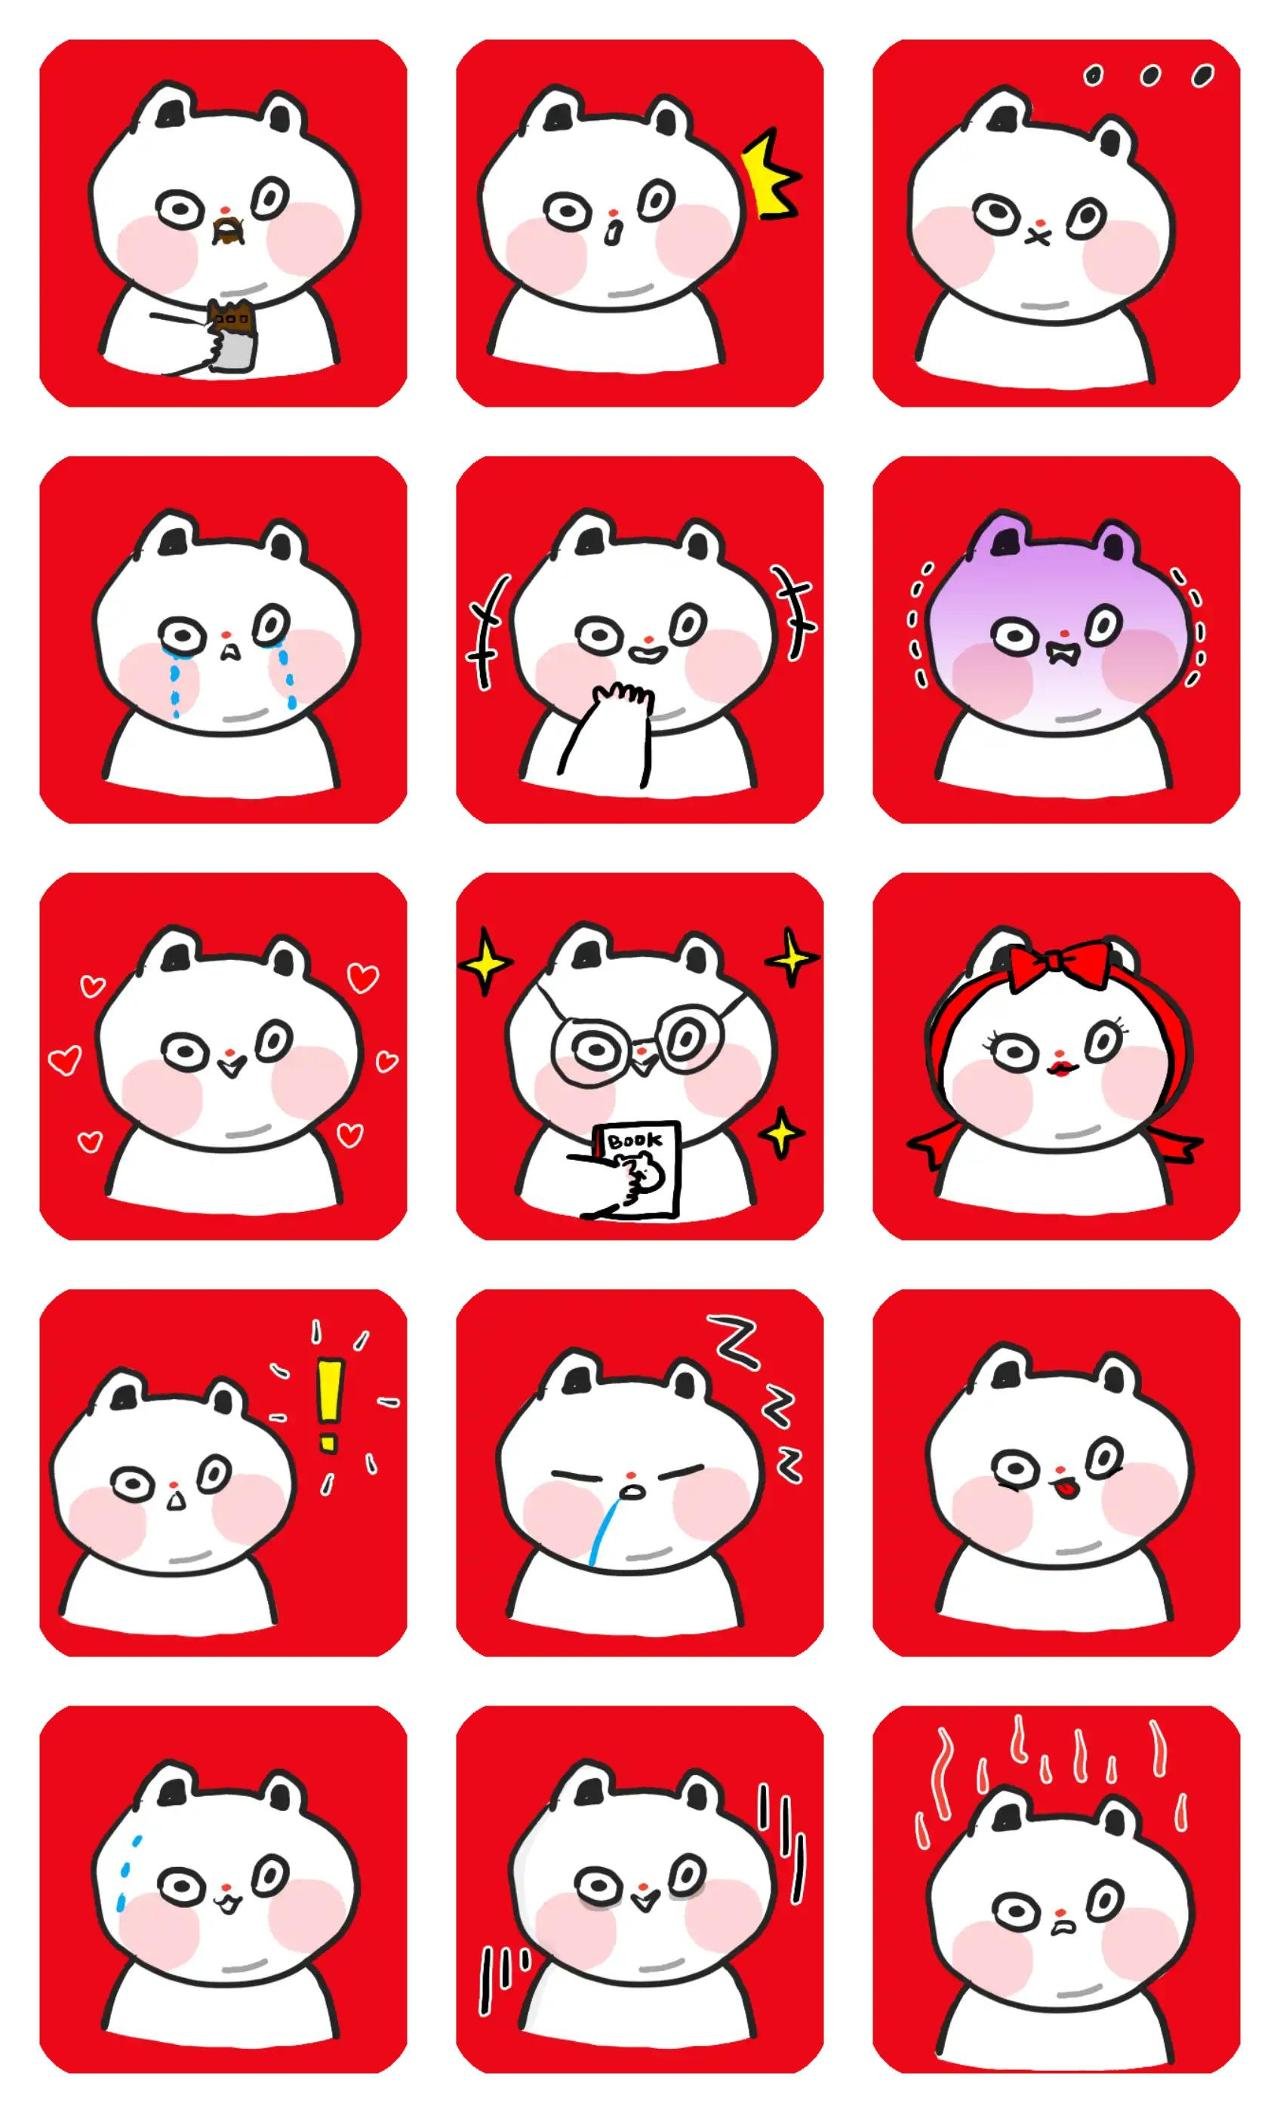 FUNNY CHUCK 3 Animation/Cartoon,Animals sticker pack for Whatsapp, Telegram, Signal, and others chatting and message apps